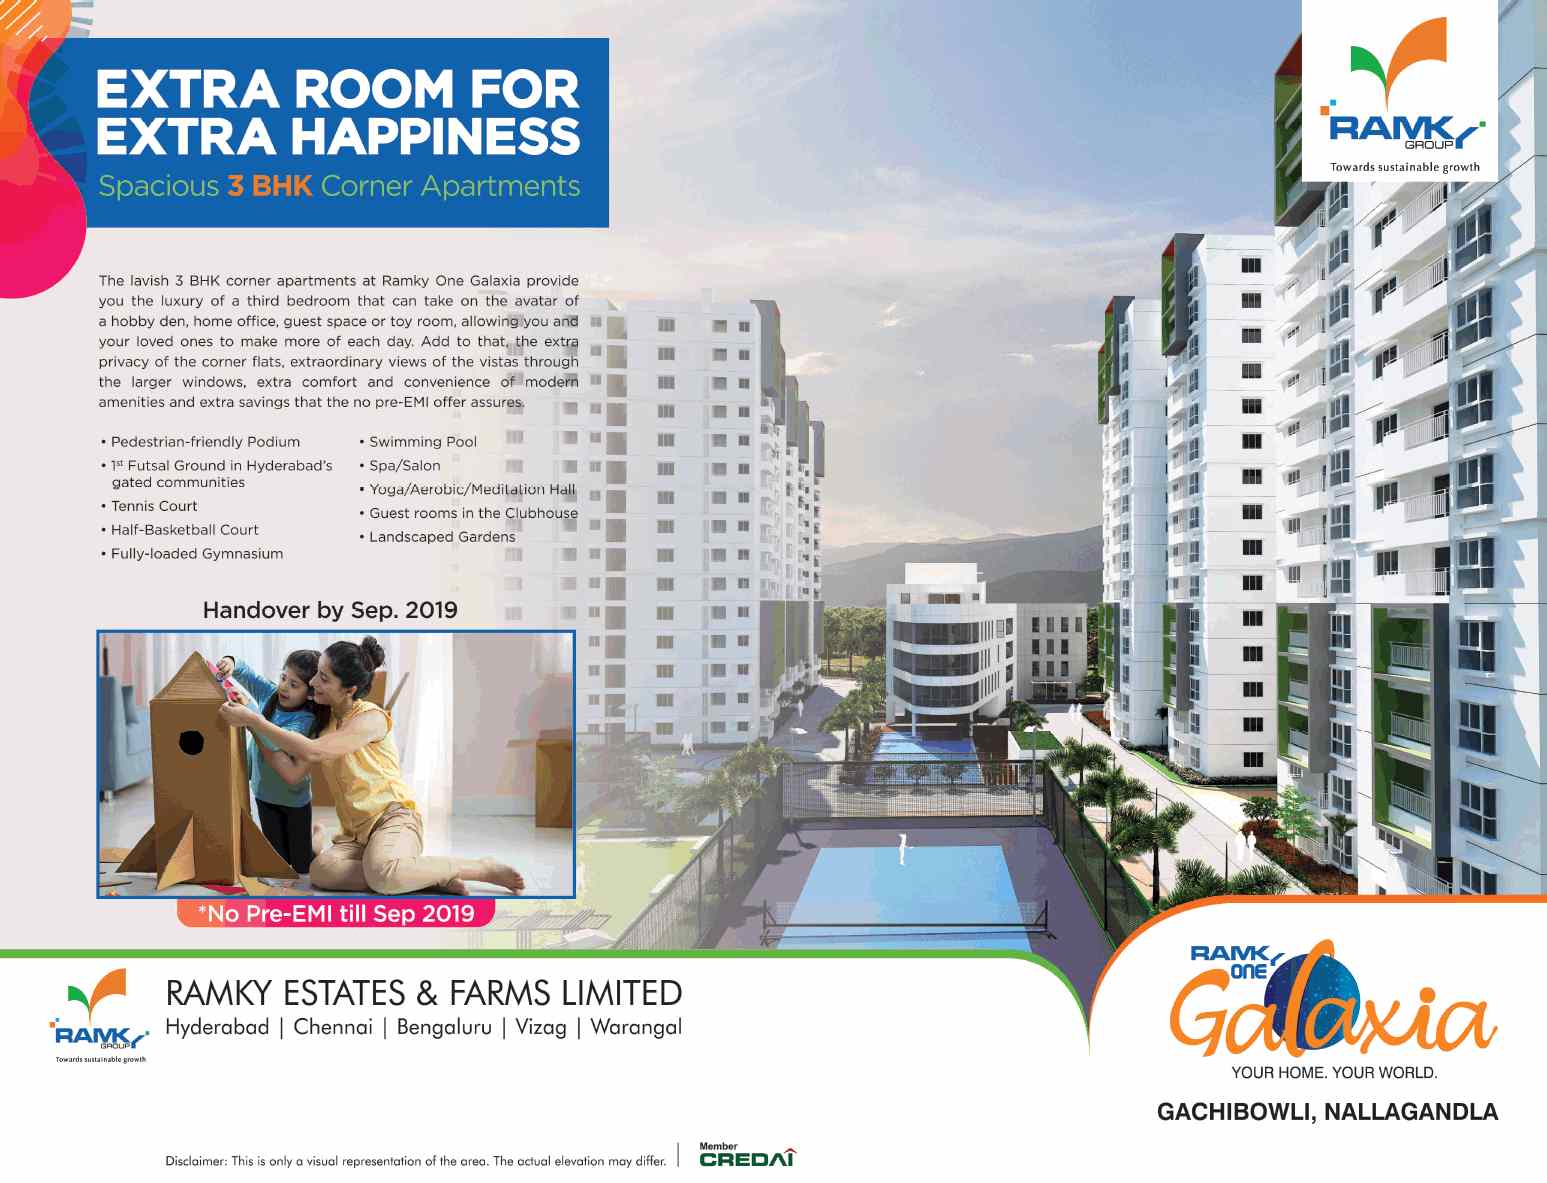 Book lavish 3 BHK corner apartments at Ramky One Galaxia in Hyderabad